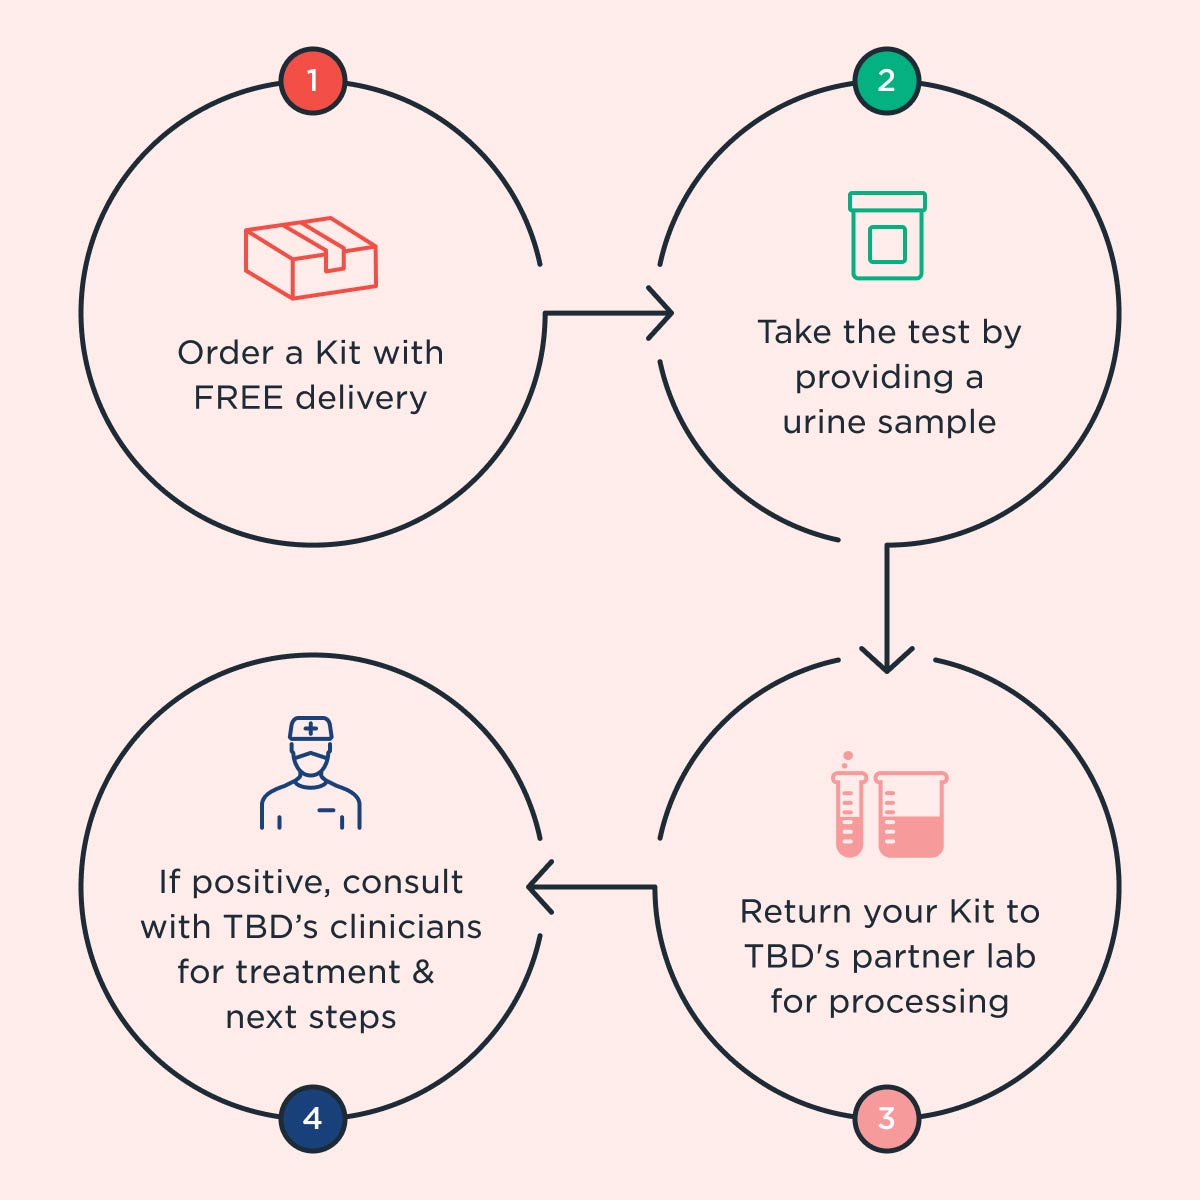 the steps to use this kit: order with free delivery, take the test by providing a urine sample, mailing the kit back to the partner laboratory, and consulting with a TBD Health clinician for treatment